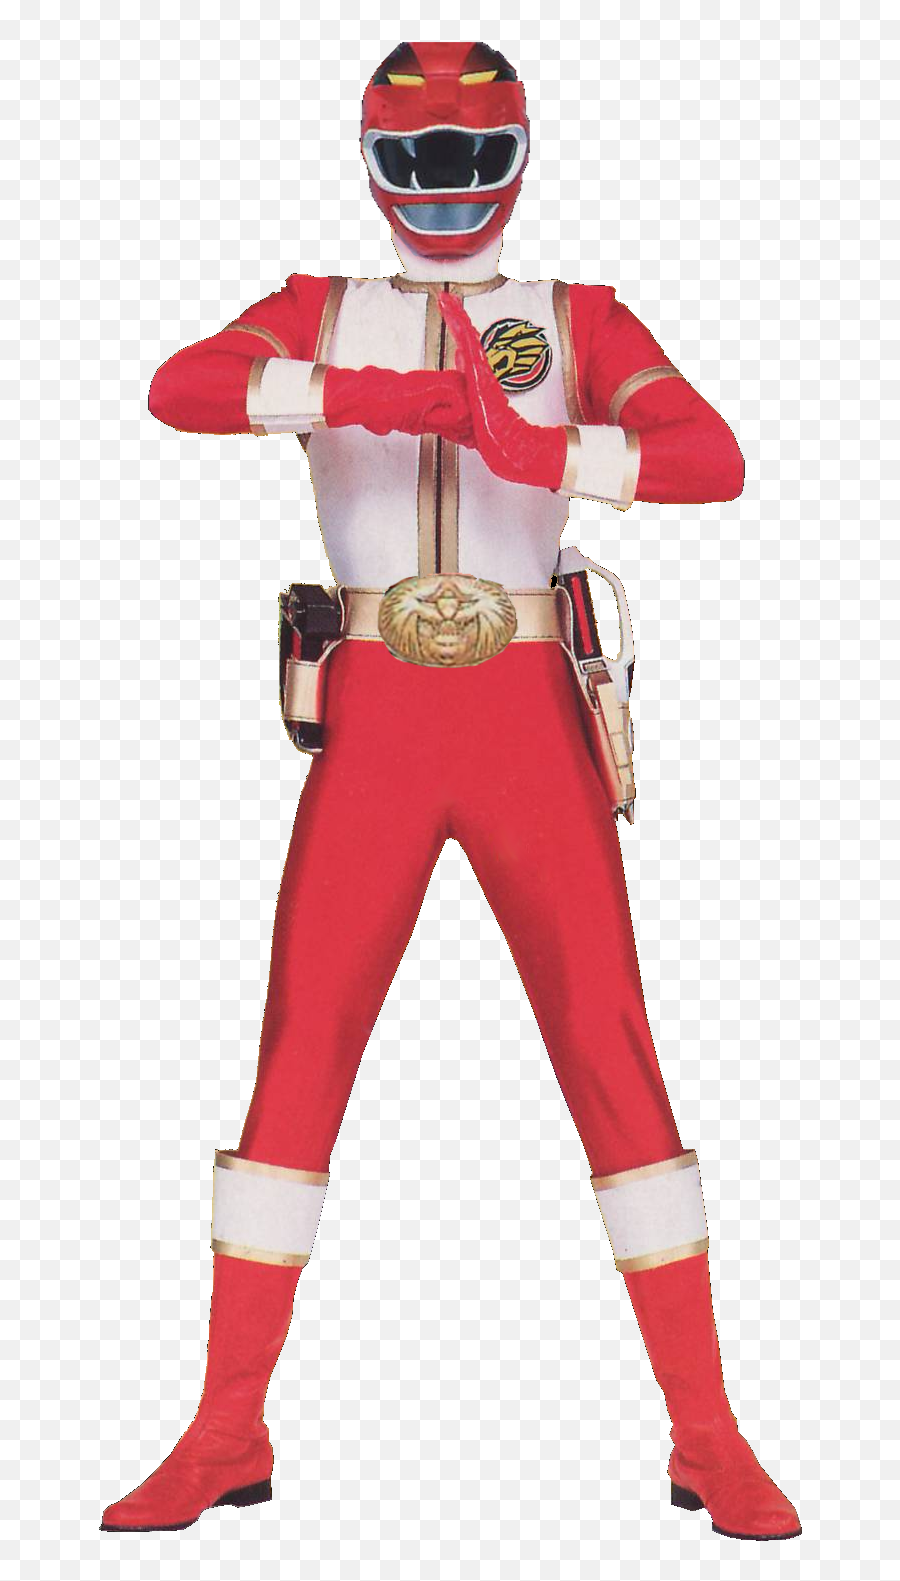 Red Power Ranger Png 2 Image - Red Power Rangers Wild Force,Red Power Ranger Png